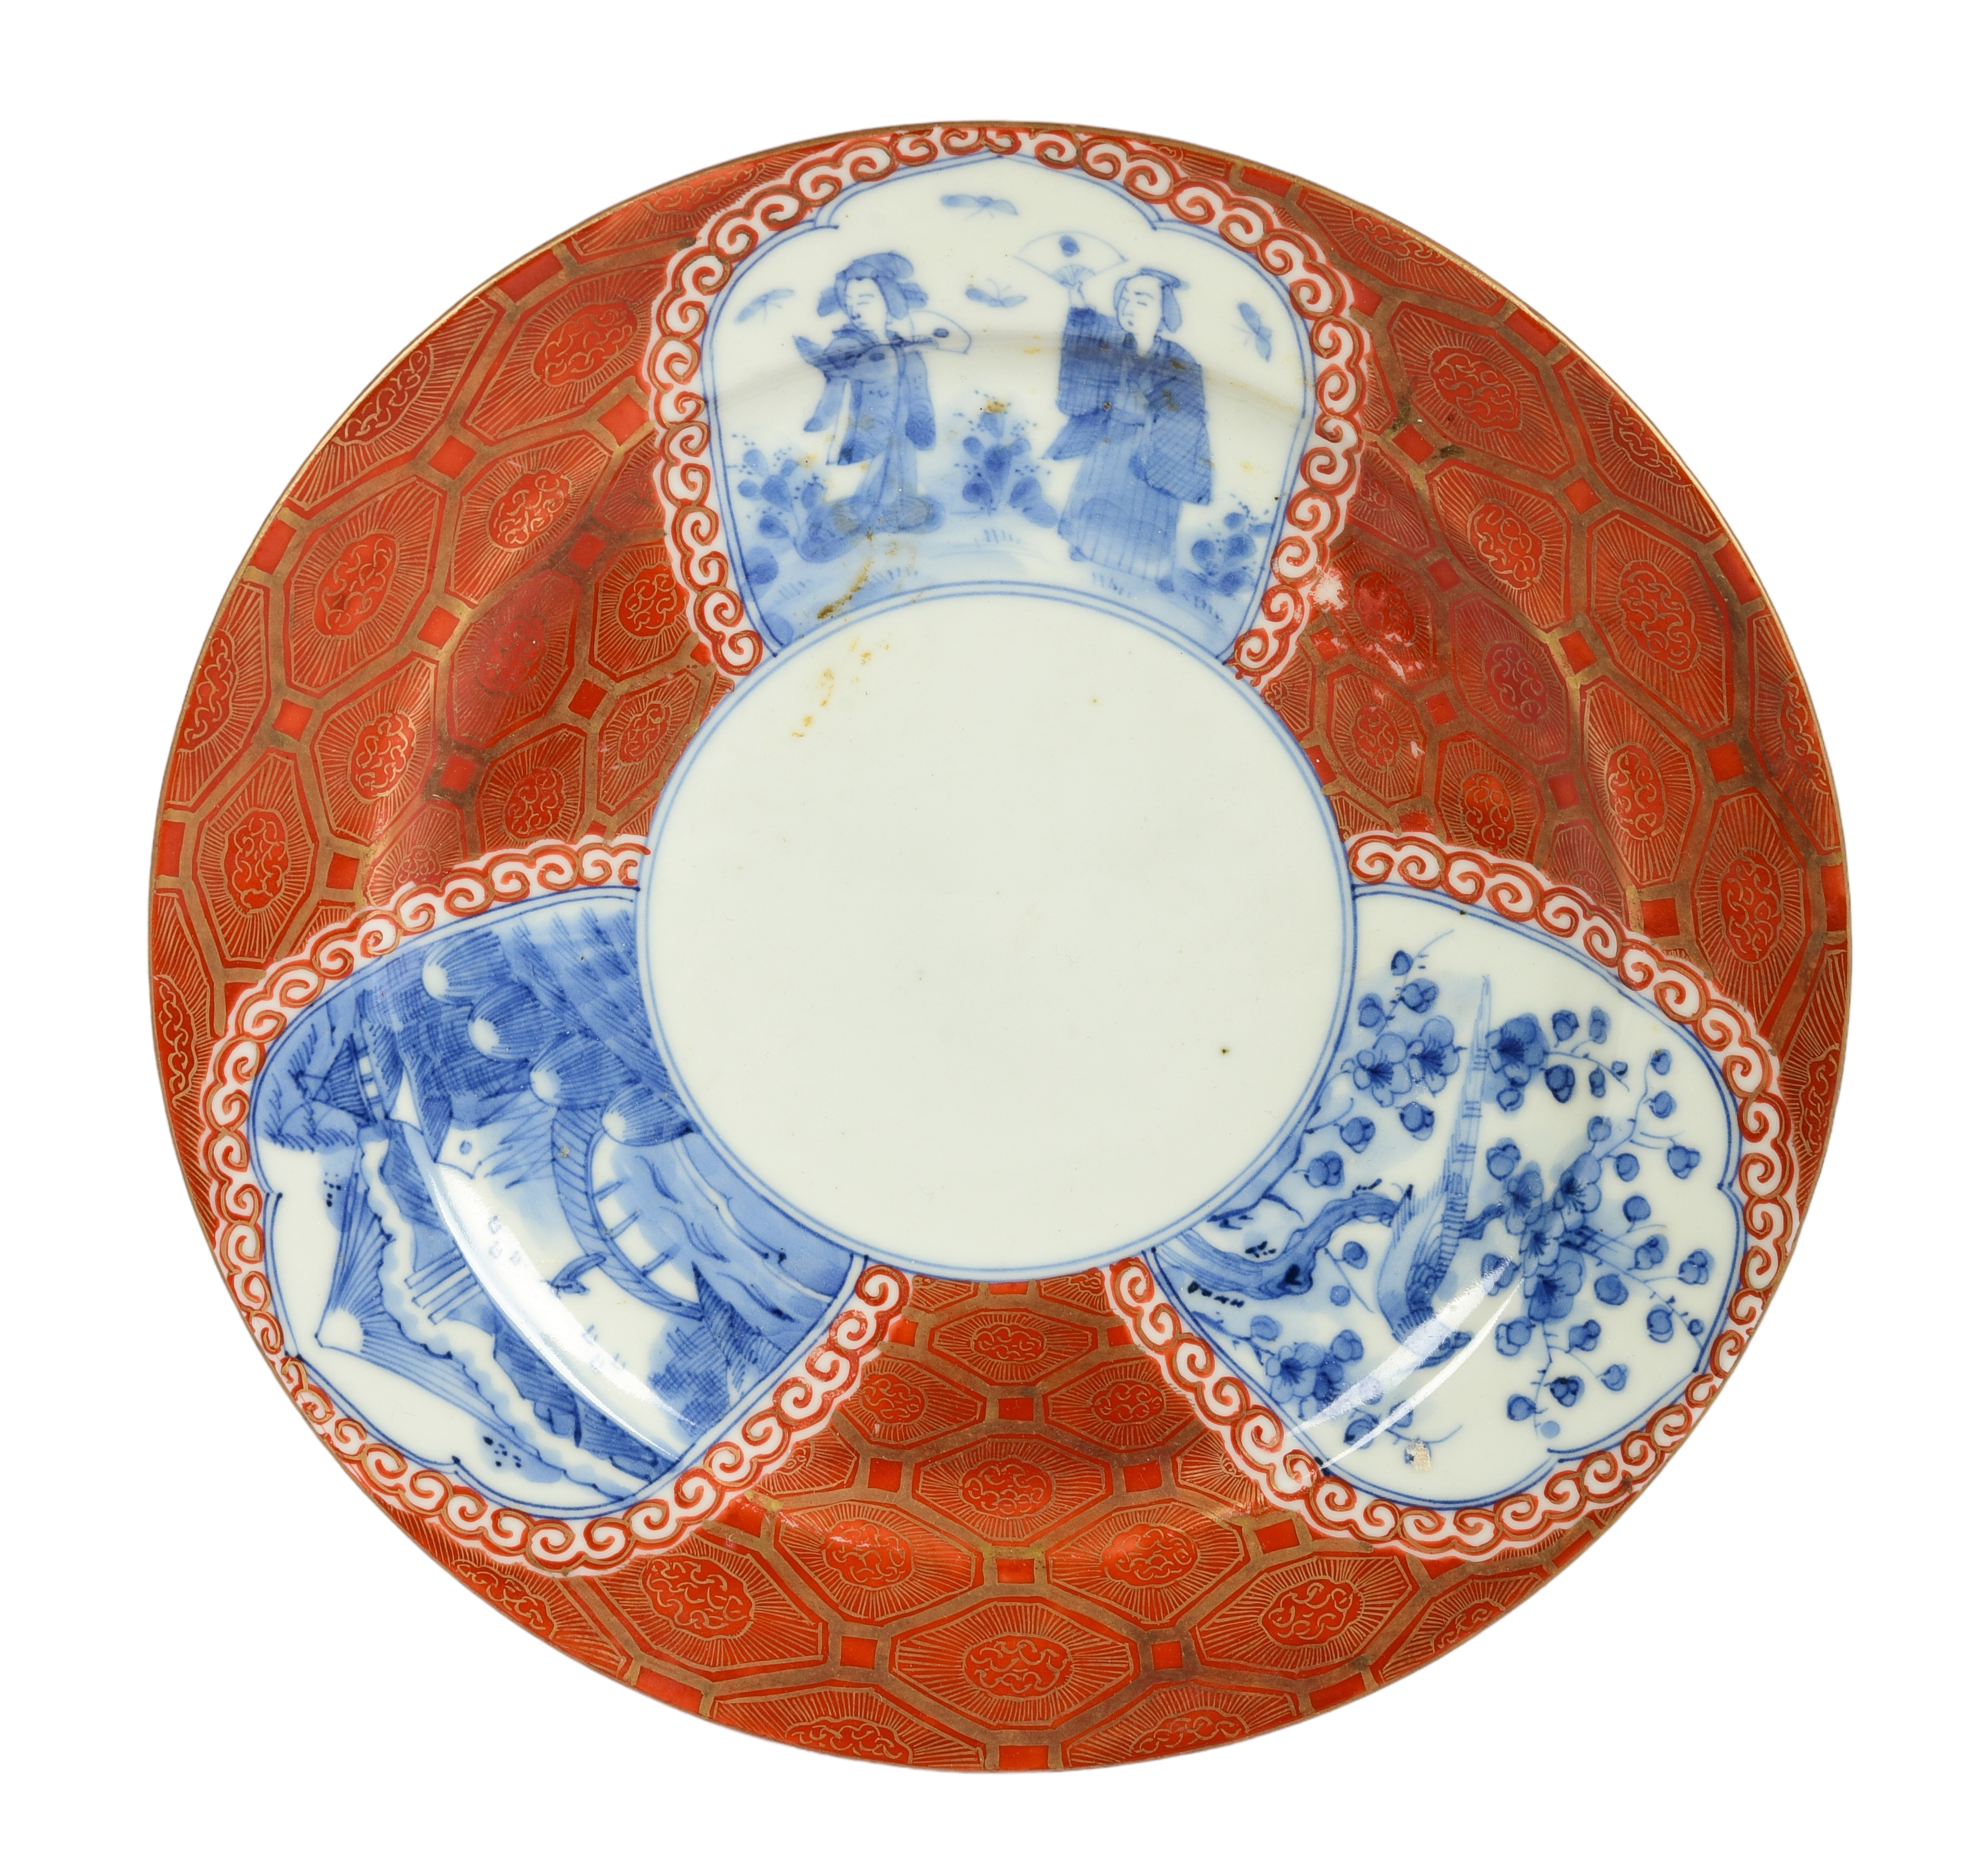 Japanese porcelain plate, 6-character